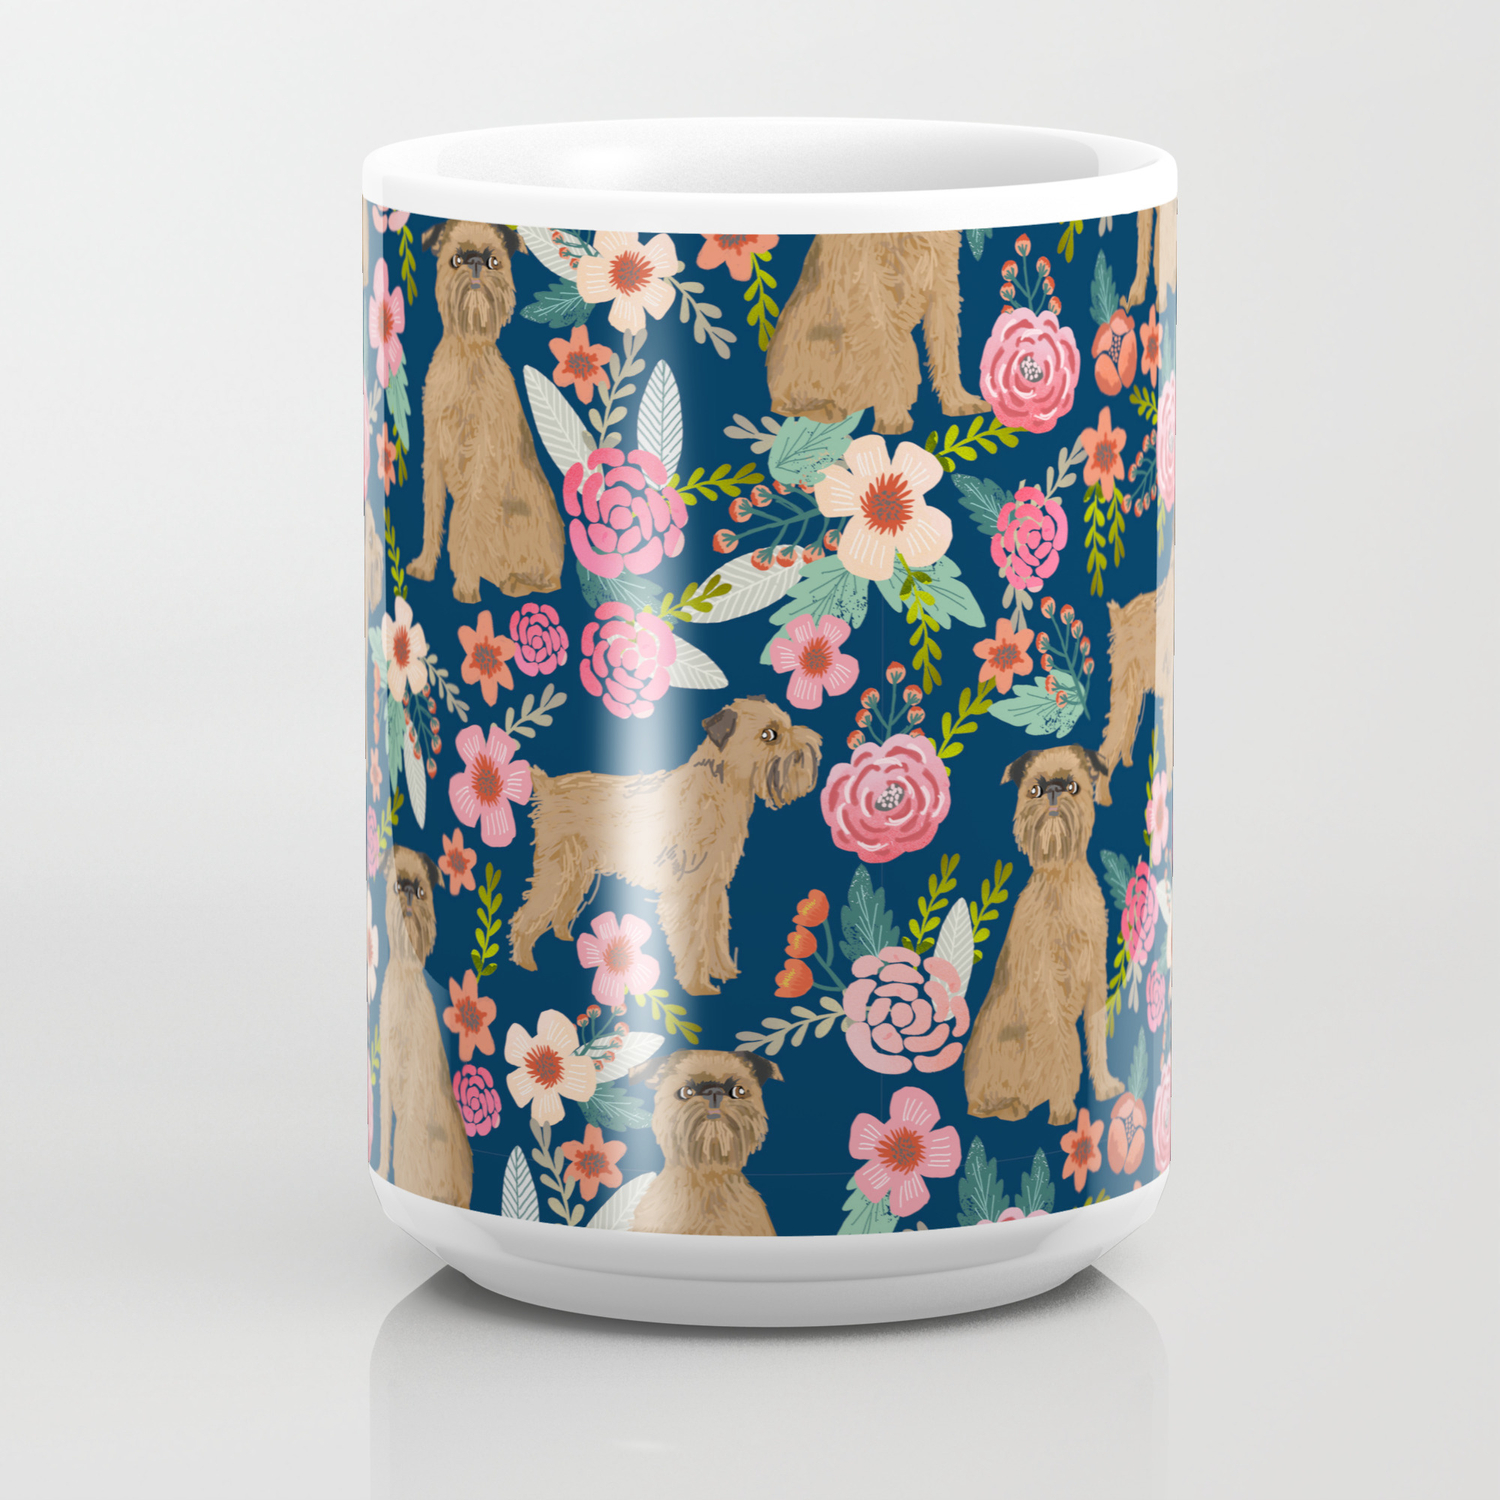 Mug With Different Dog Breed Pattern